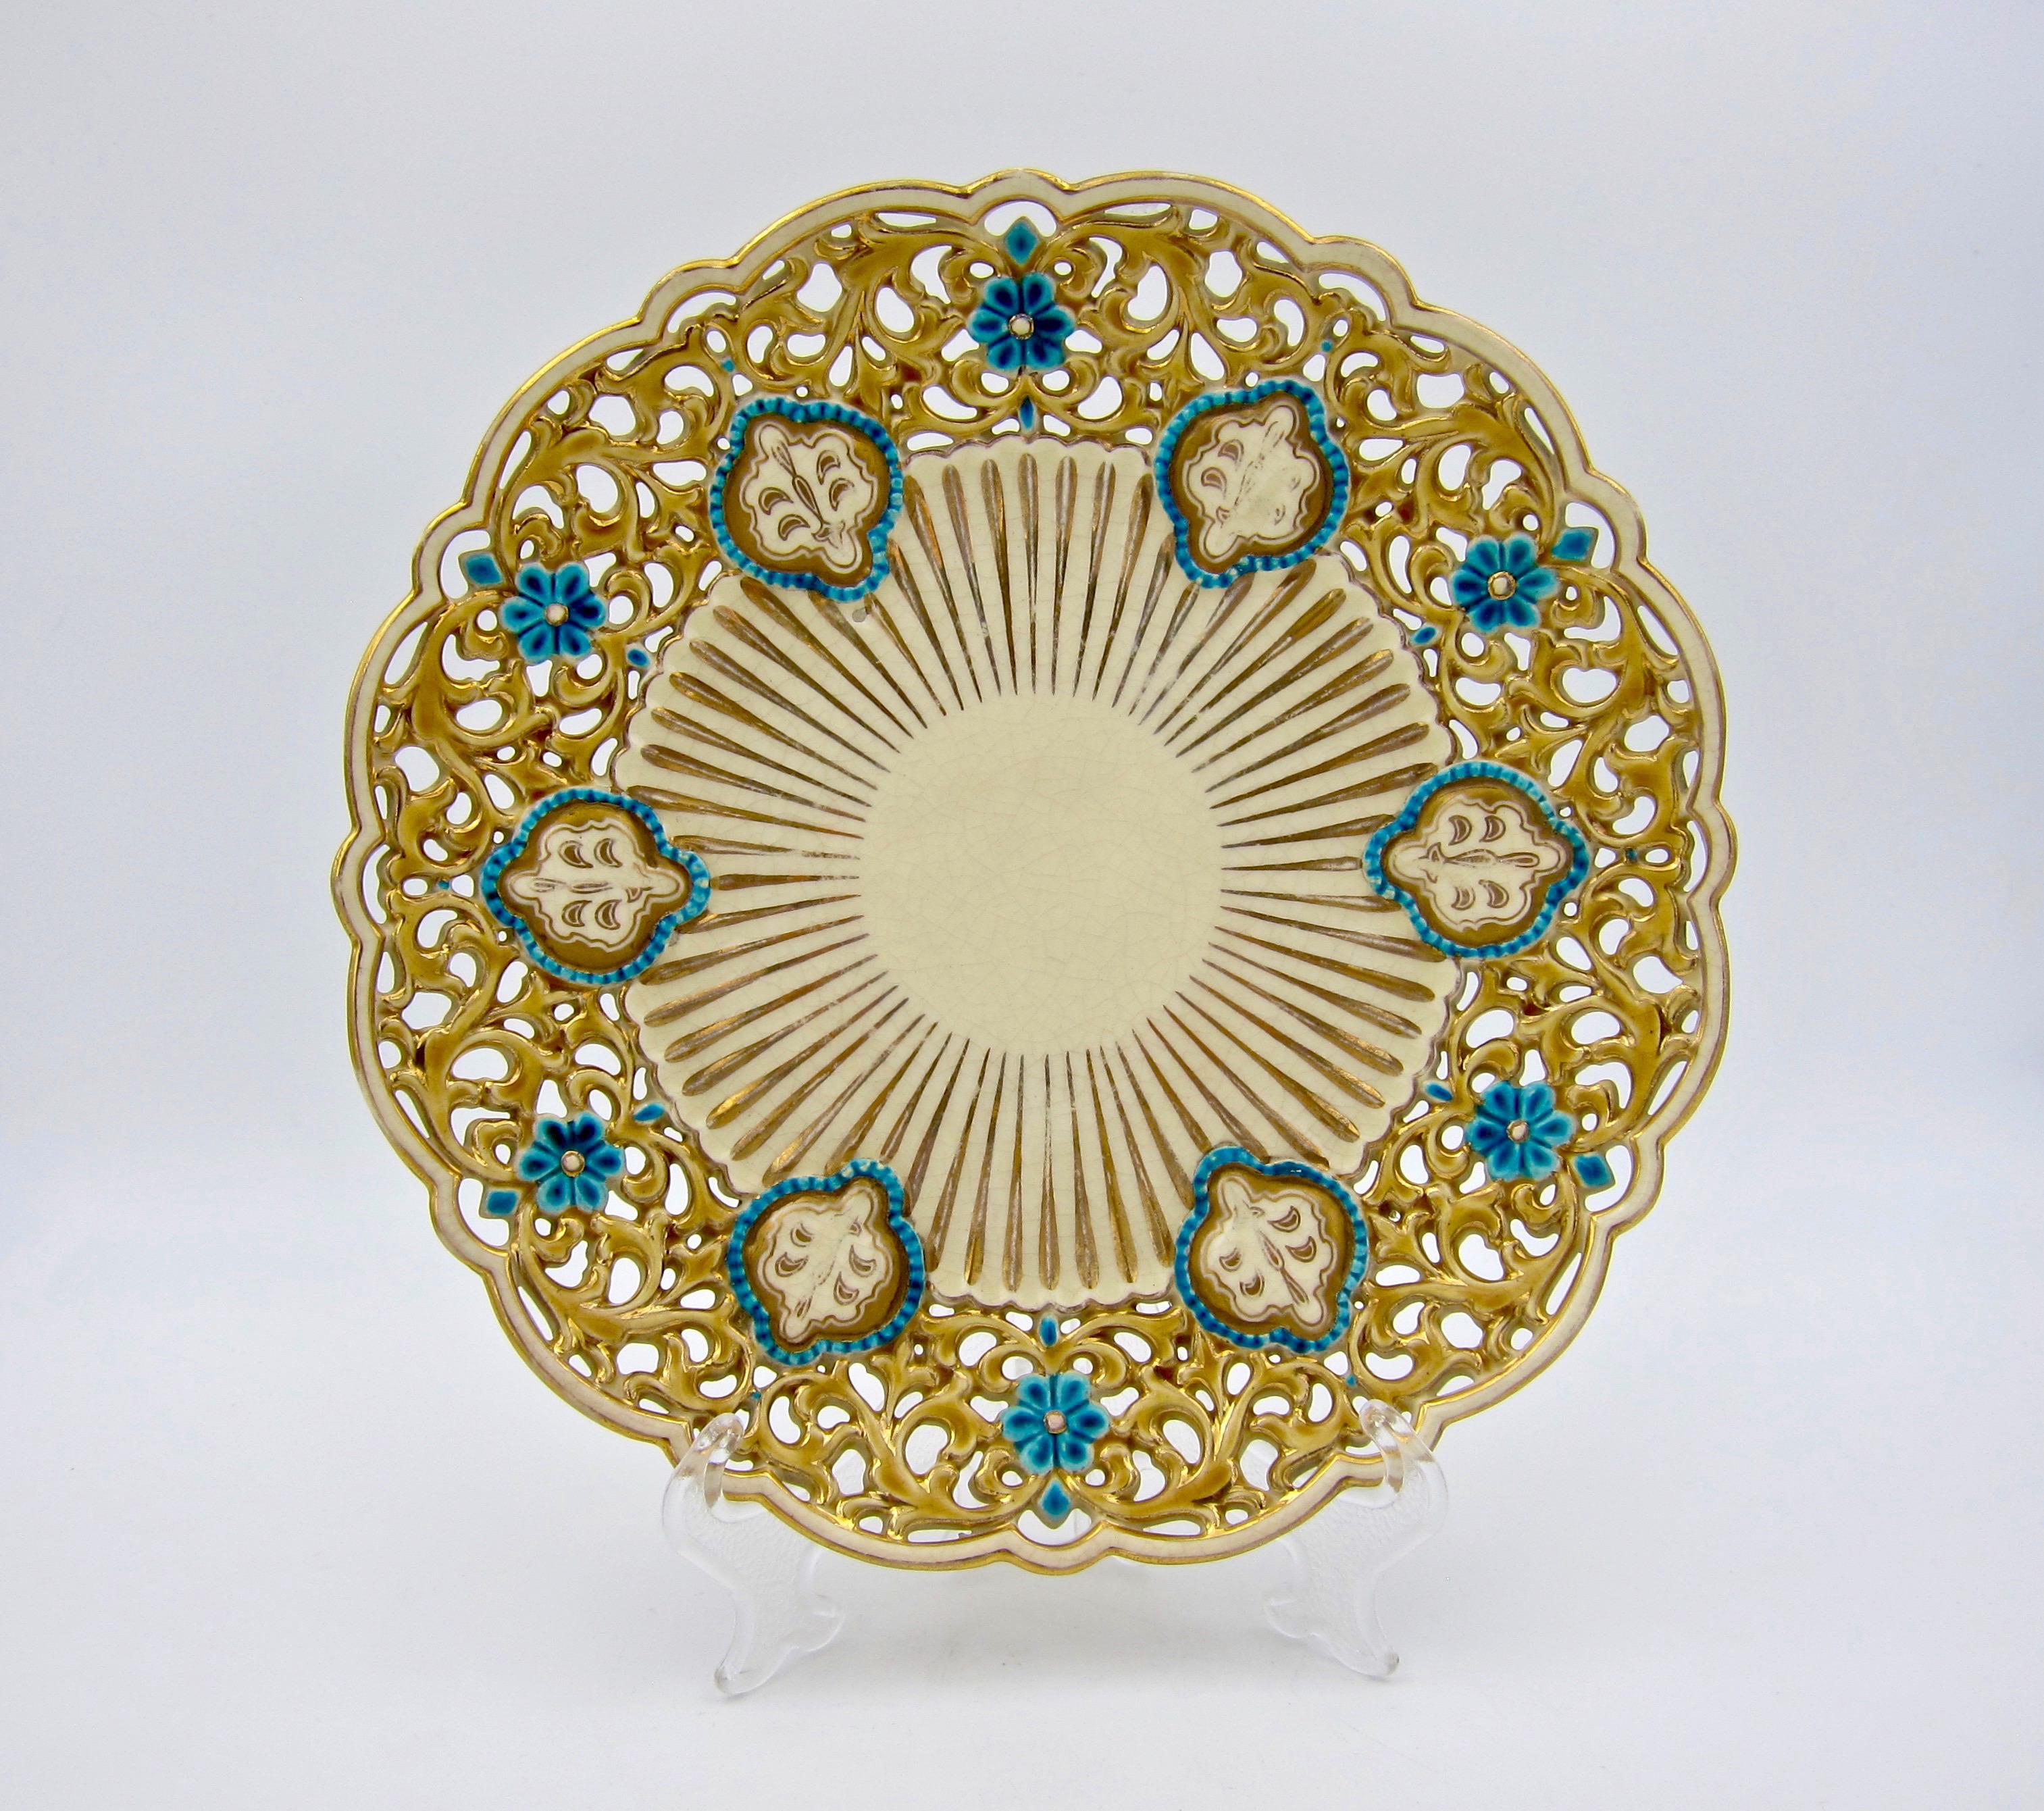 An antique ornamental cabinet plate / dish from Zsolnay Pecs of Hungary, dating circa 1880s. The faience plate is a fine example of late 19th century Victorian Eclecticism, featuring aspects of Zsolnay's Turko-Hungarian decor with gilt, gold, and